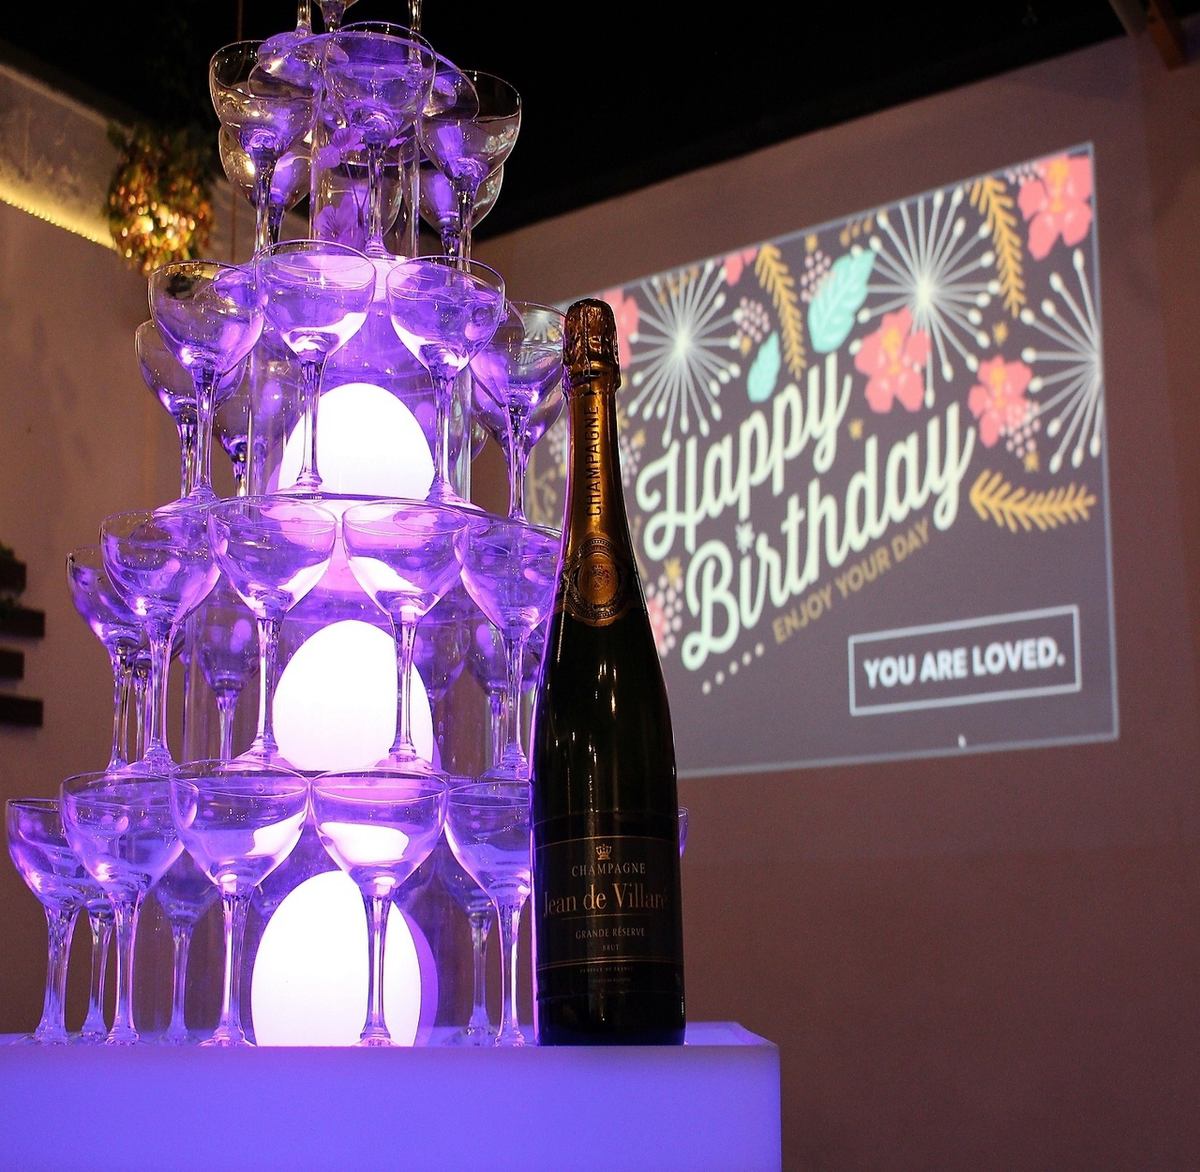 You can also make a champagne tower! We also have plenty of options to liven up your Shibuya party, such as cakes with photos and original champagne labels!